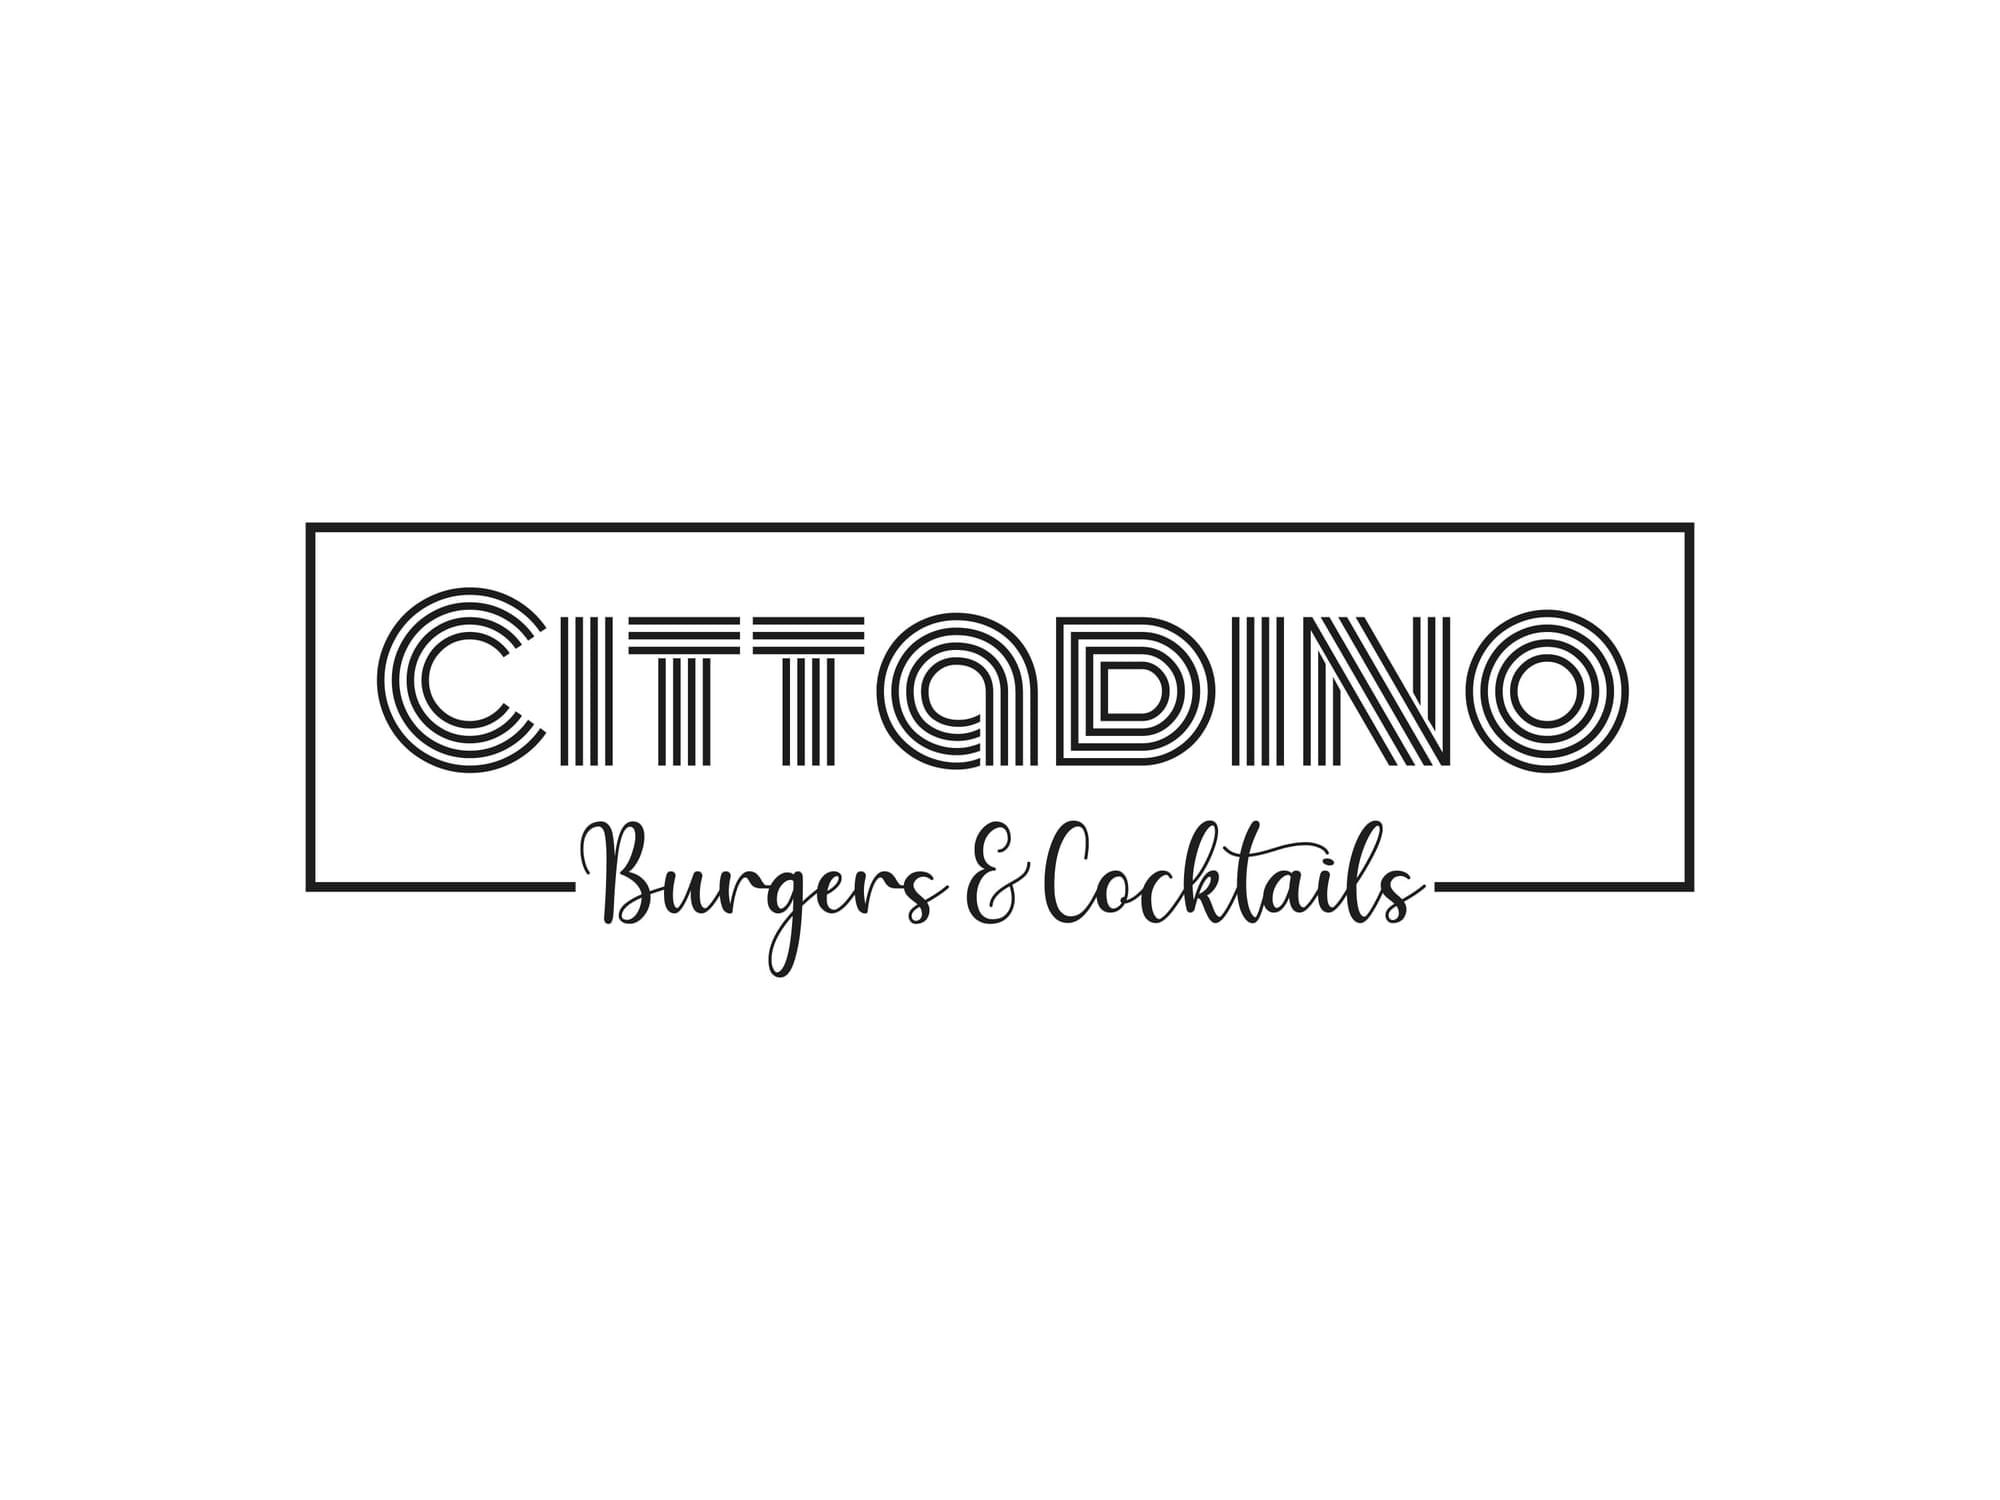 Logo of Cittadino Burgers & Cocktails used, Hotel Factory Green